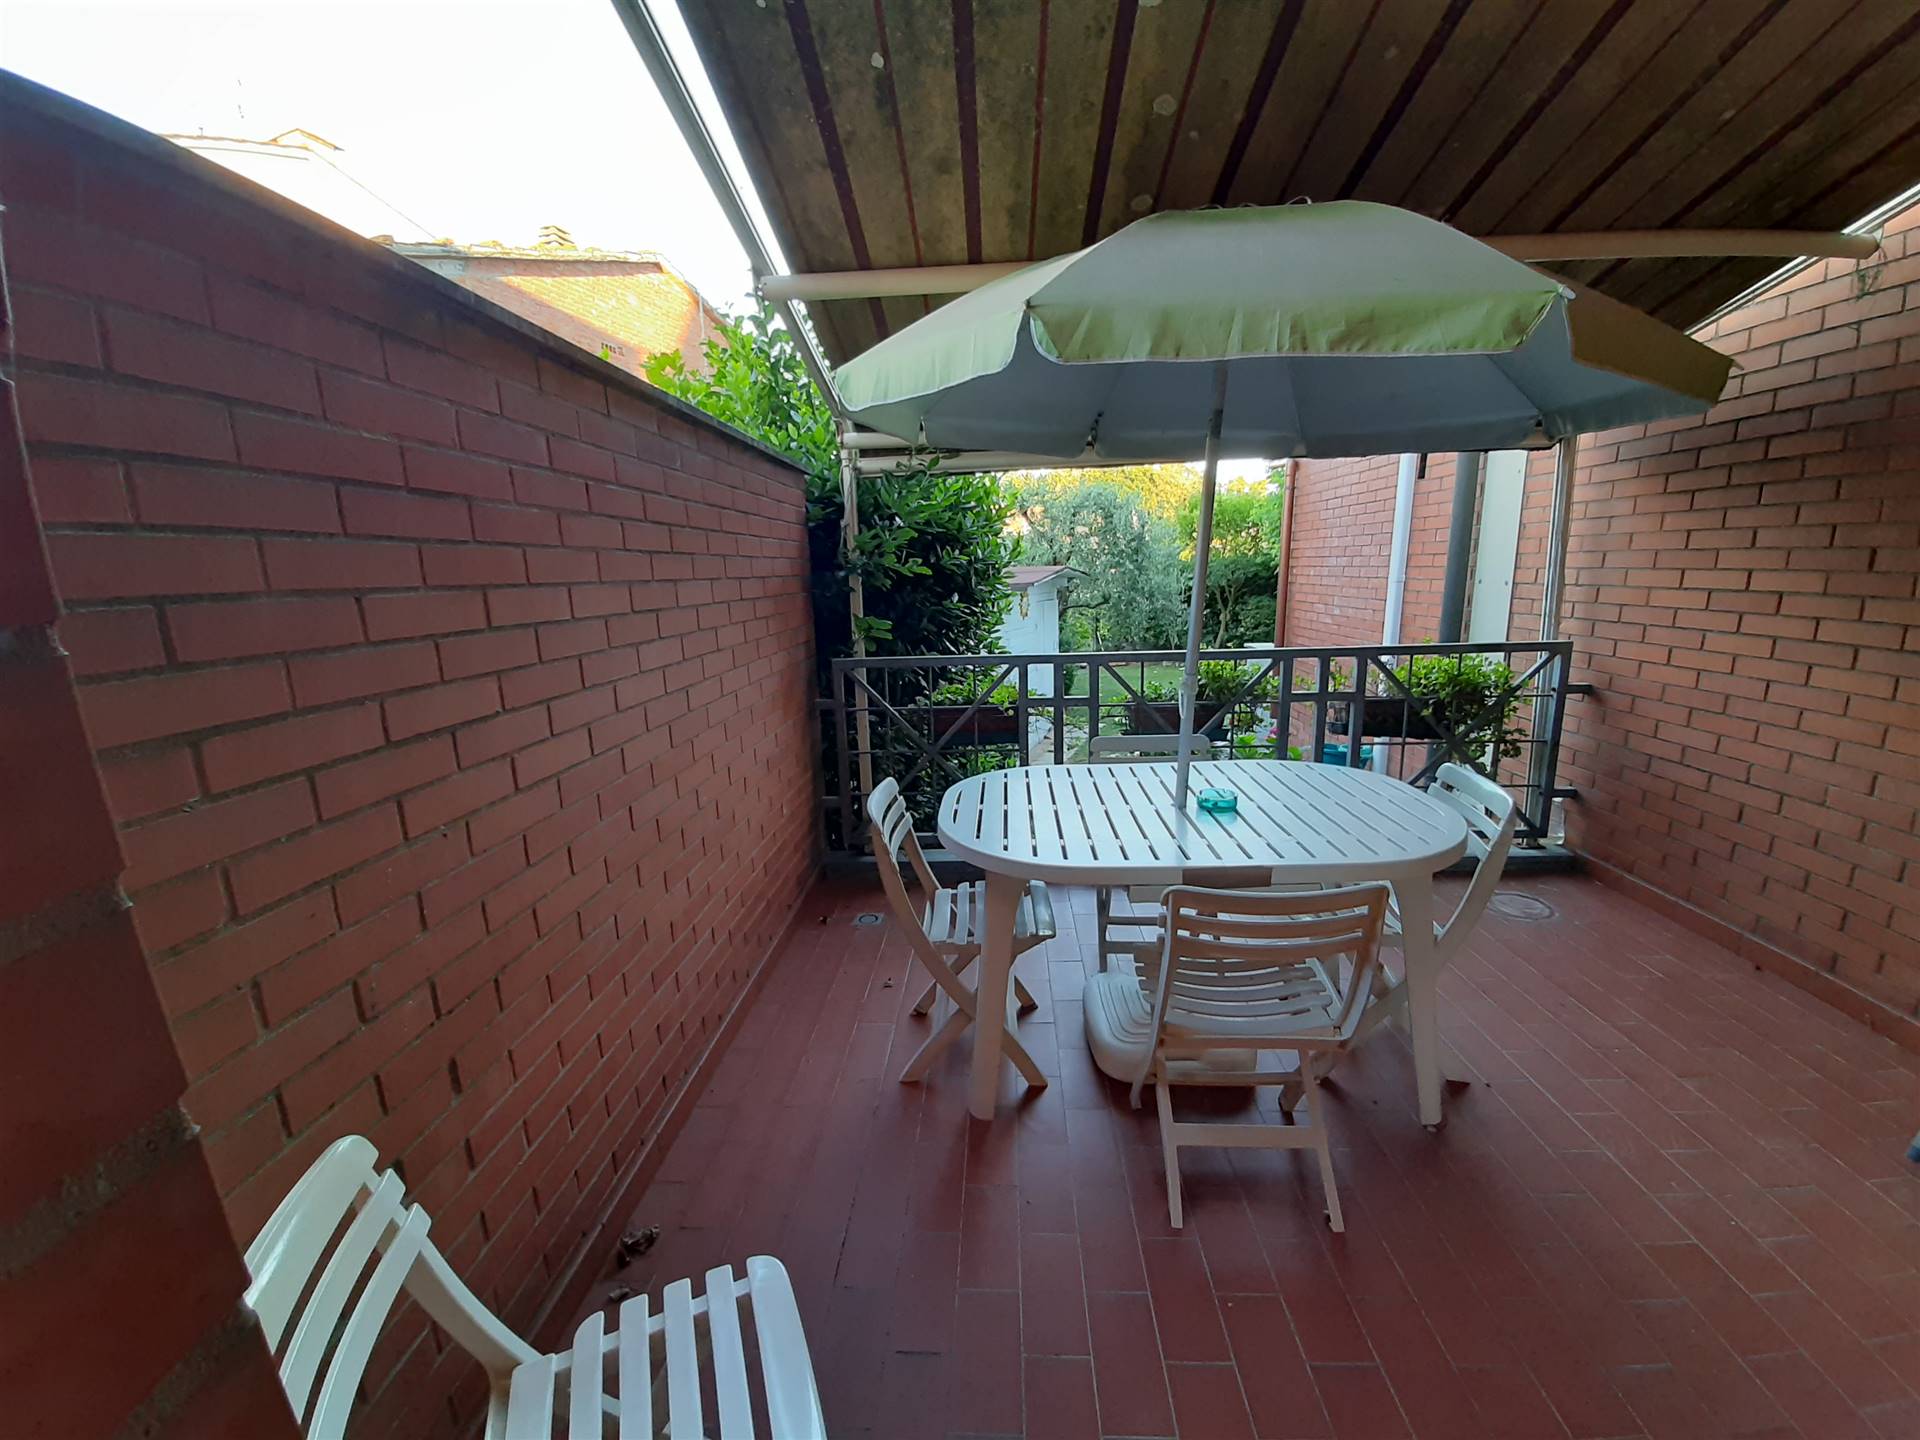 LE PINETE, FUCECCHIO, Detached apartment for sale of 60 Sq. mt., Excellent Condition, Heating Individual heating system, Energetic class: F, Epi: 170,